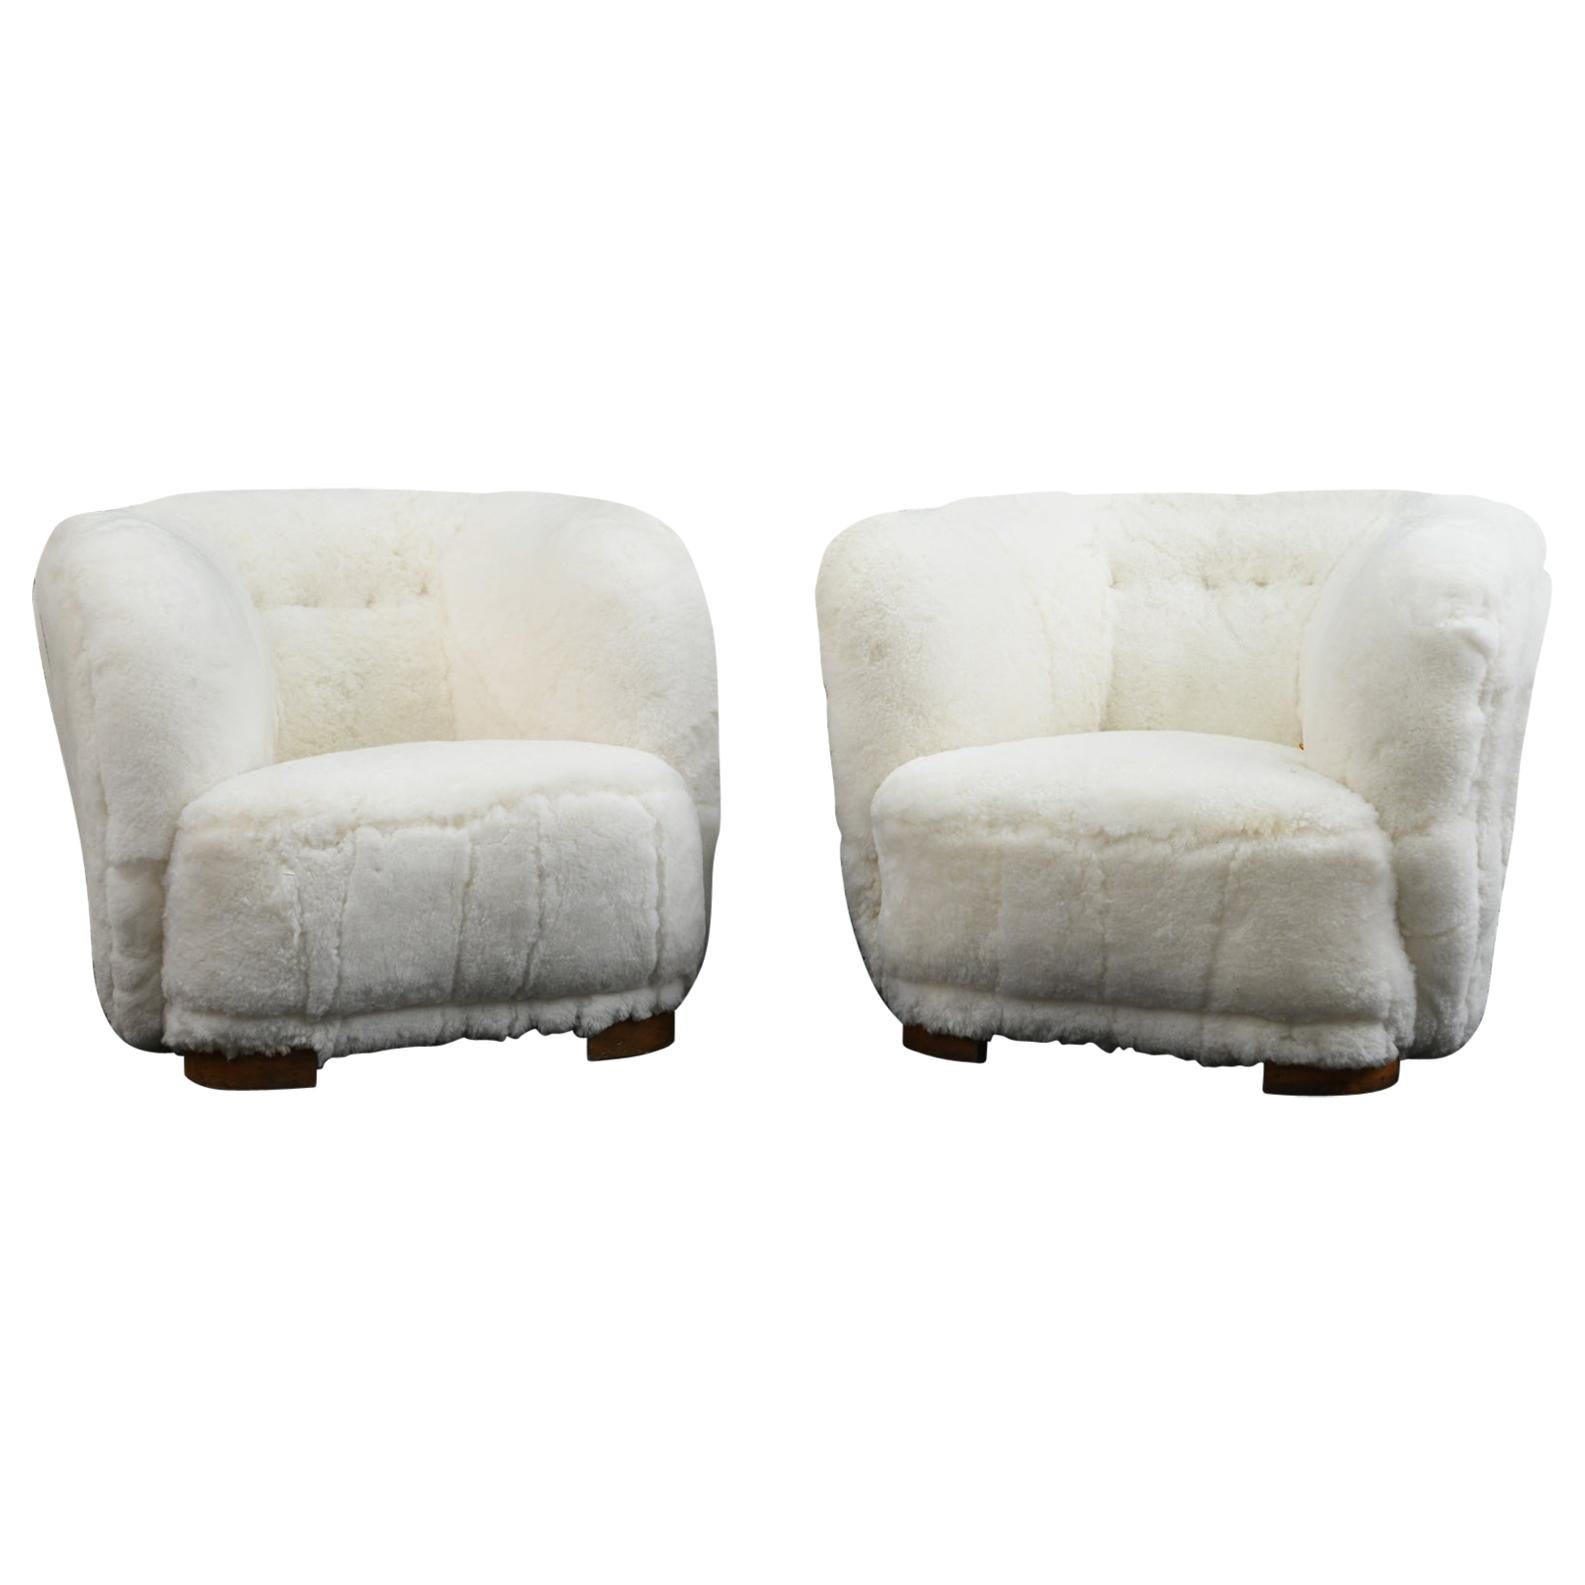 Pair of Viggo Boesen Style Lounge or Club Chairs in Lambswool, Danish, 1940s